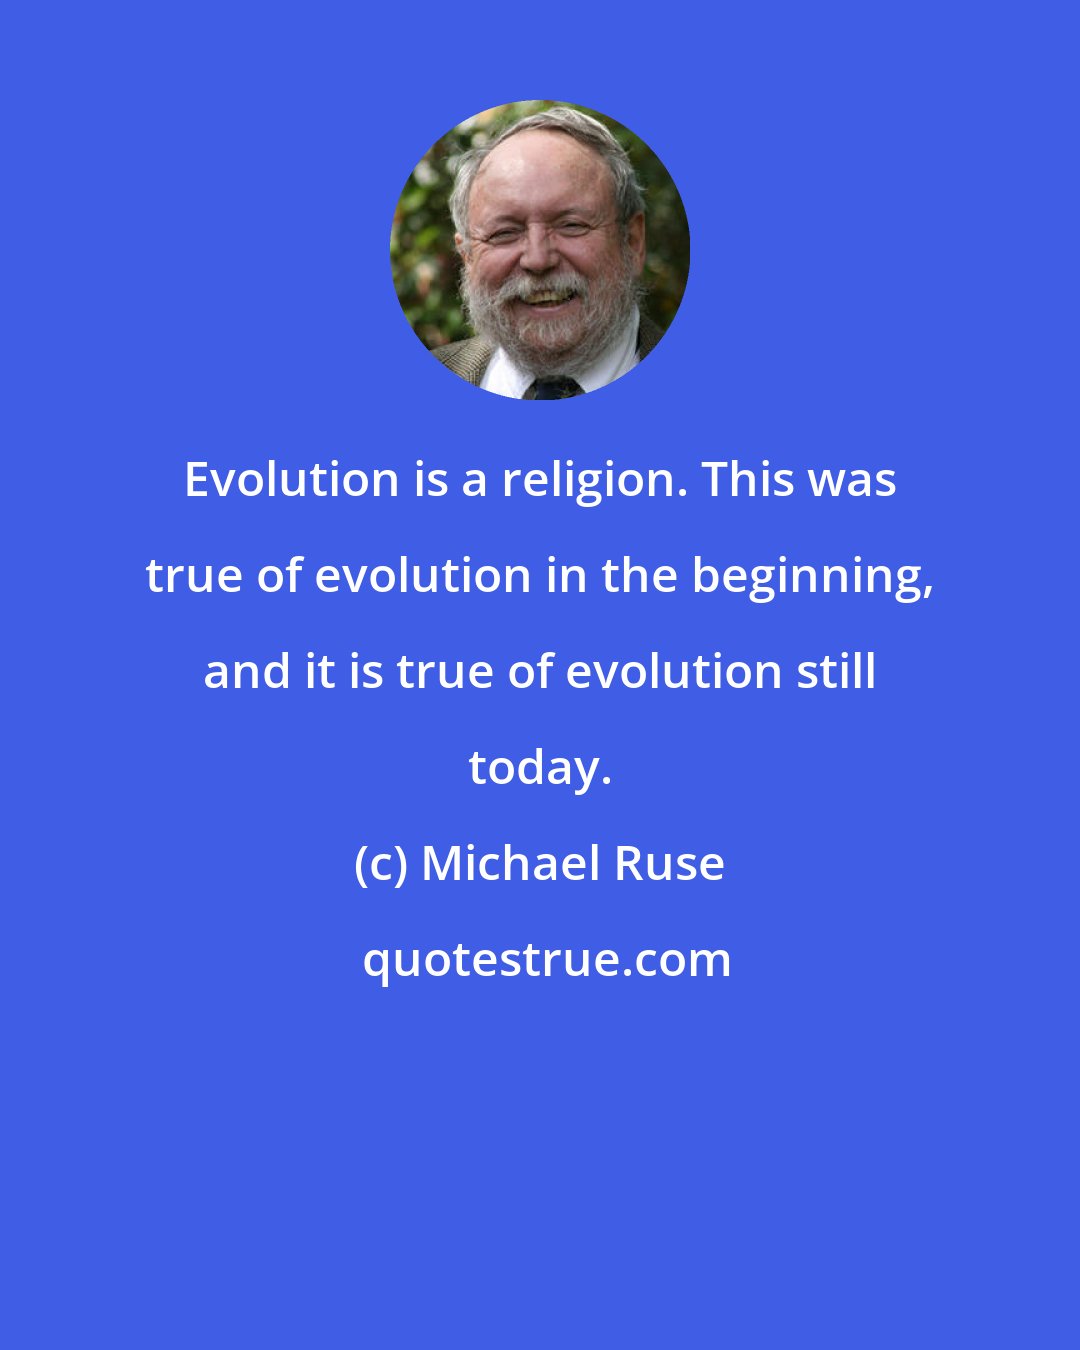 Michael Ruse: Evolution is a religion. This was true of evolution in the beginning, and it is true of evolution still today.